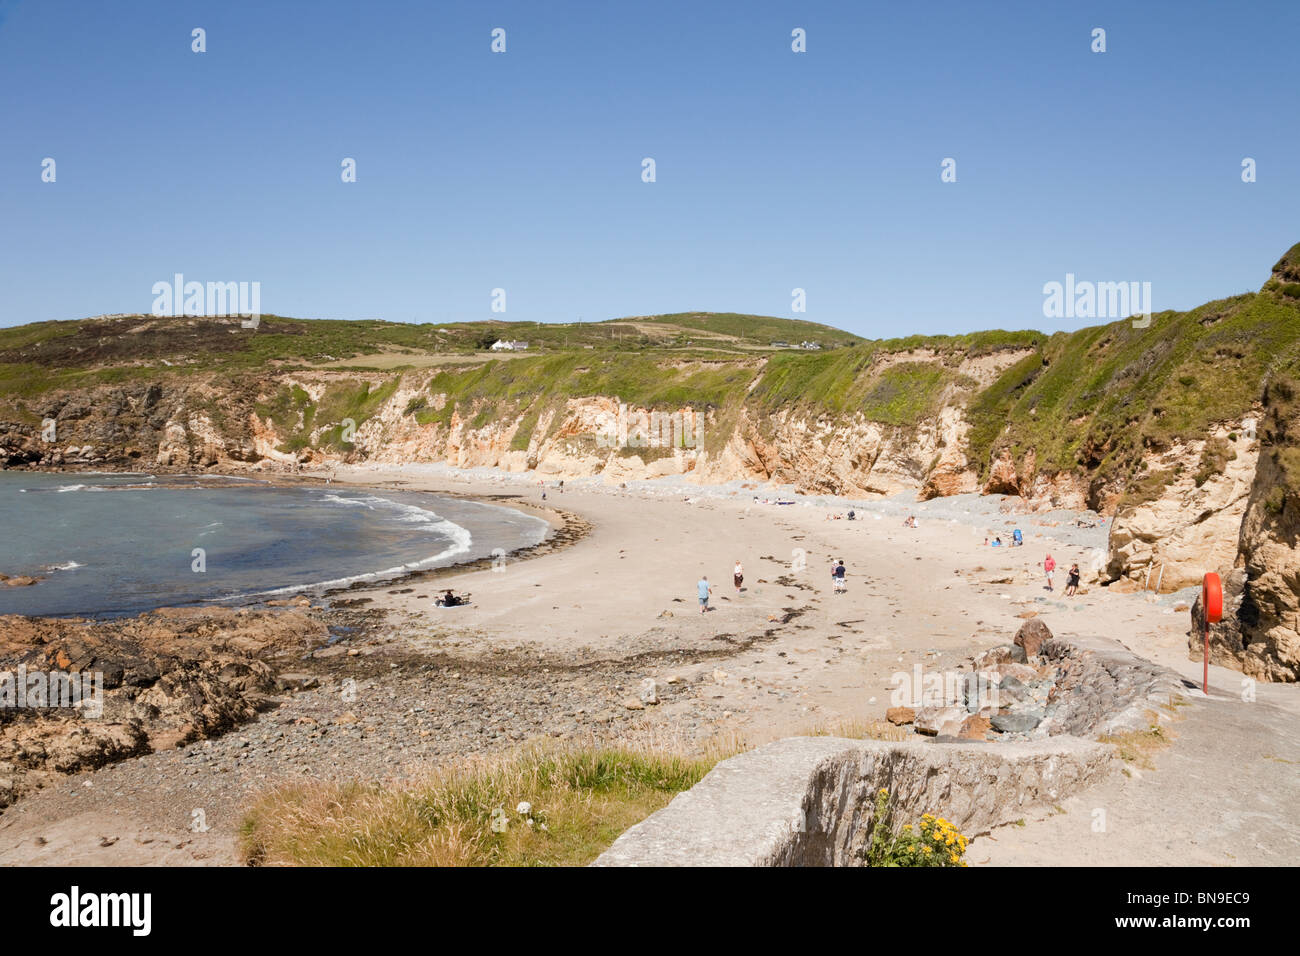 View to the quiet sandy beach with with people in summer. Church Bay (Porth Swtan), Isle of Anglesey, North Wales, UK, Britain Stock Photo